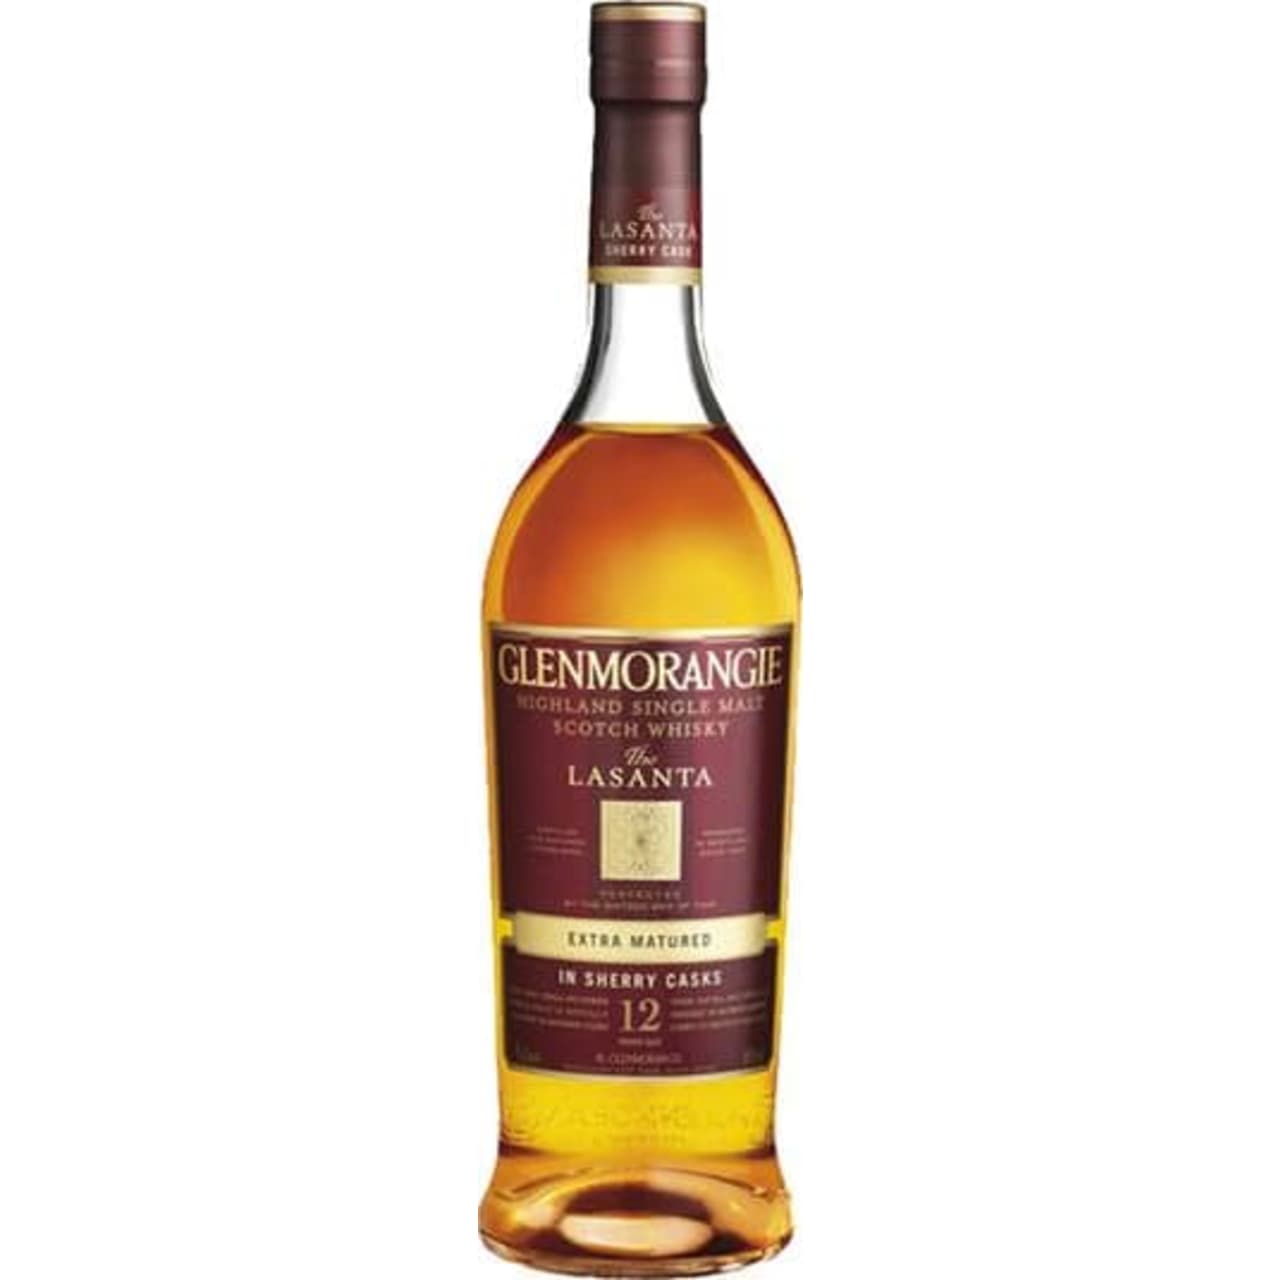 A delicious and soft whisky, with lots of sweet sherry flavoured sultanas, orange segments and butterscotch, combining to create complex warm spices. A long and satisfying finish with spiced orange, chocolate and hazelnuts.